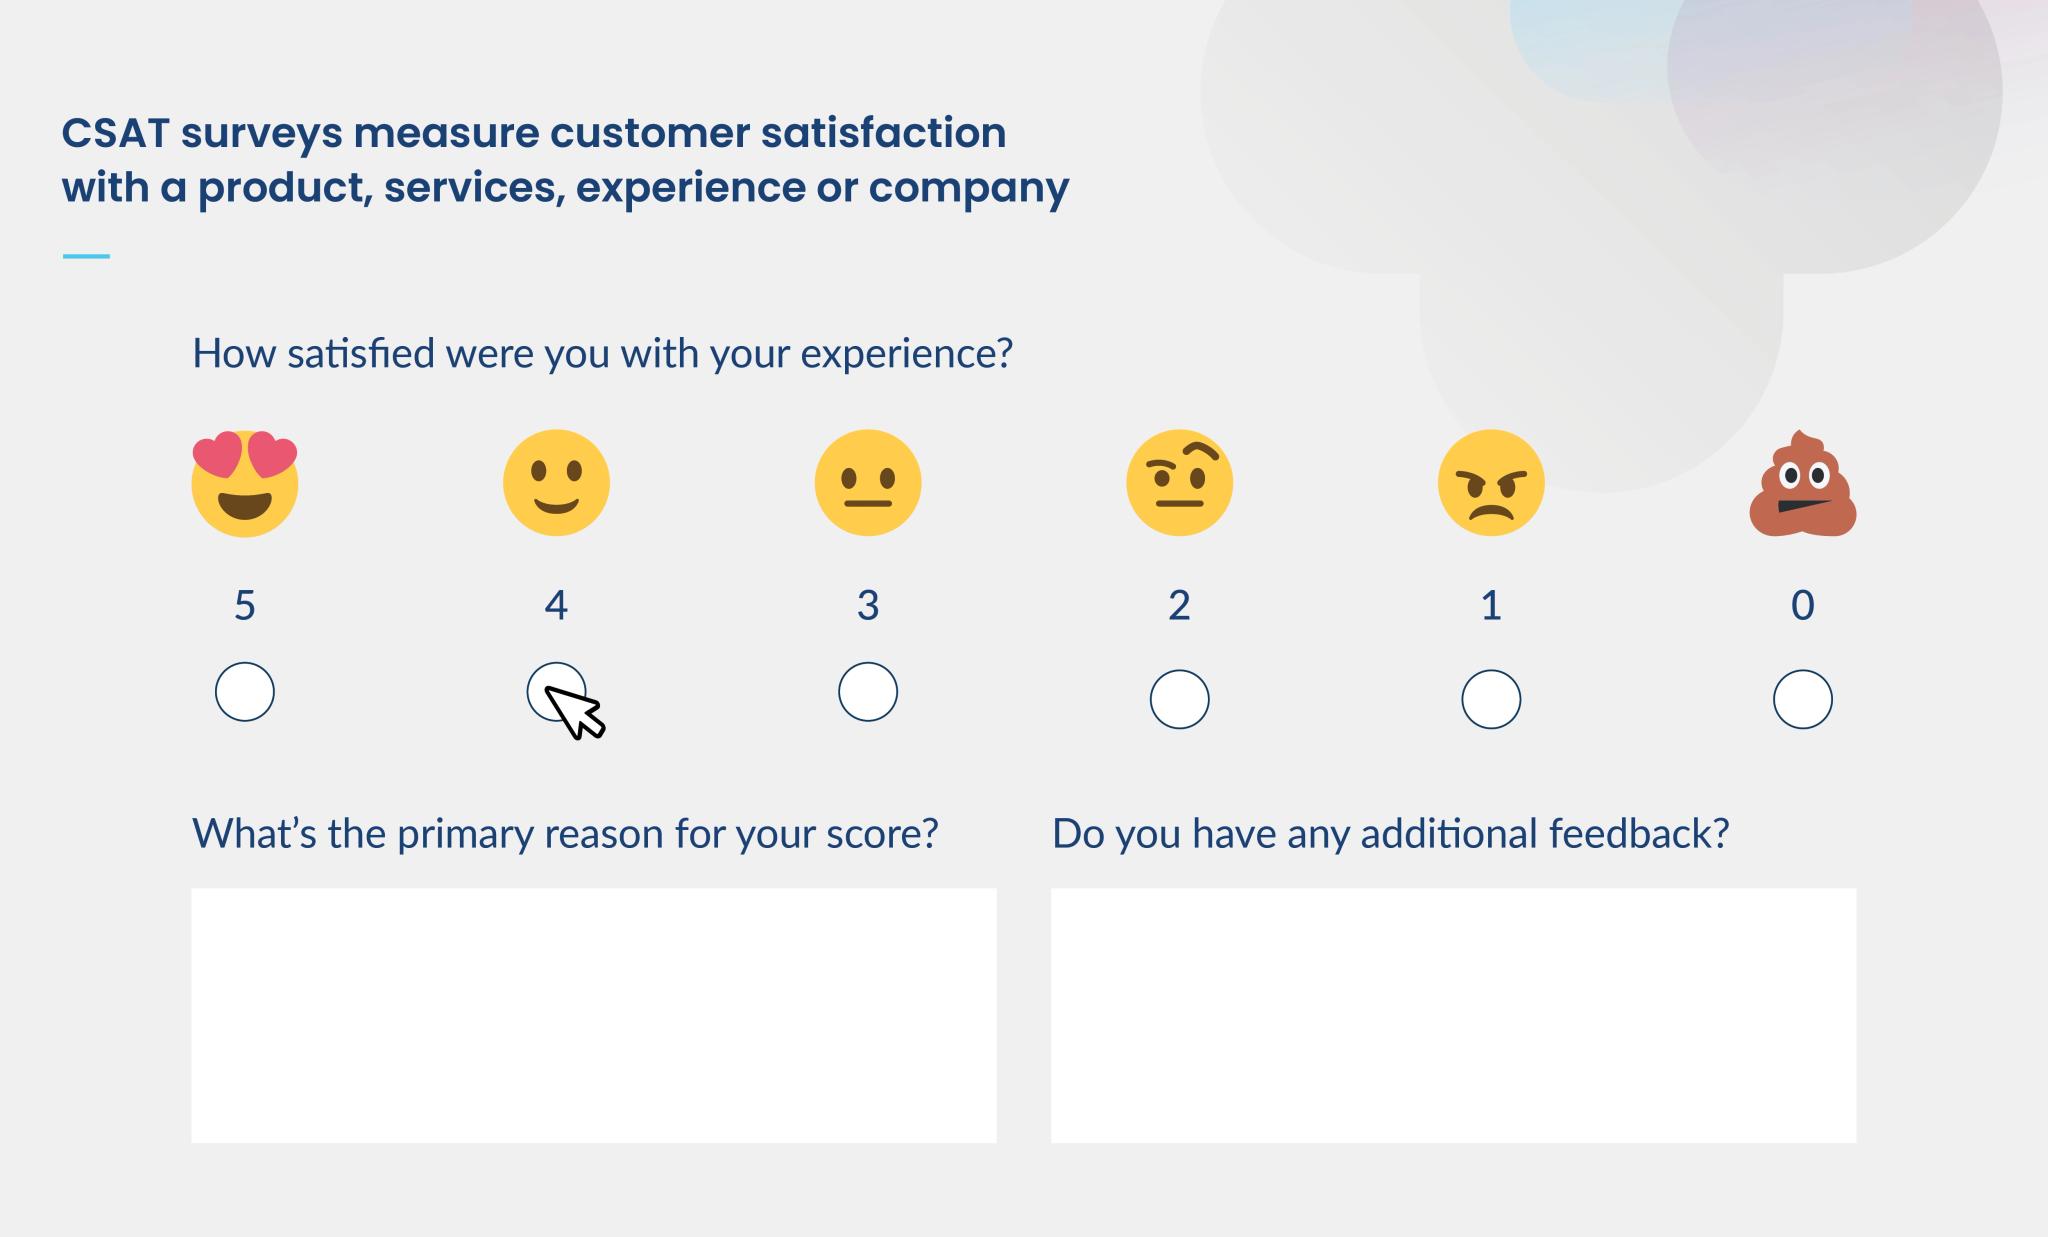 CSAT surveys measure customer satisfaction with a product, service, experience or company